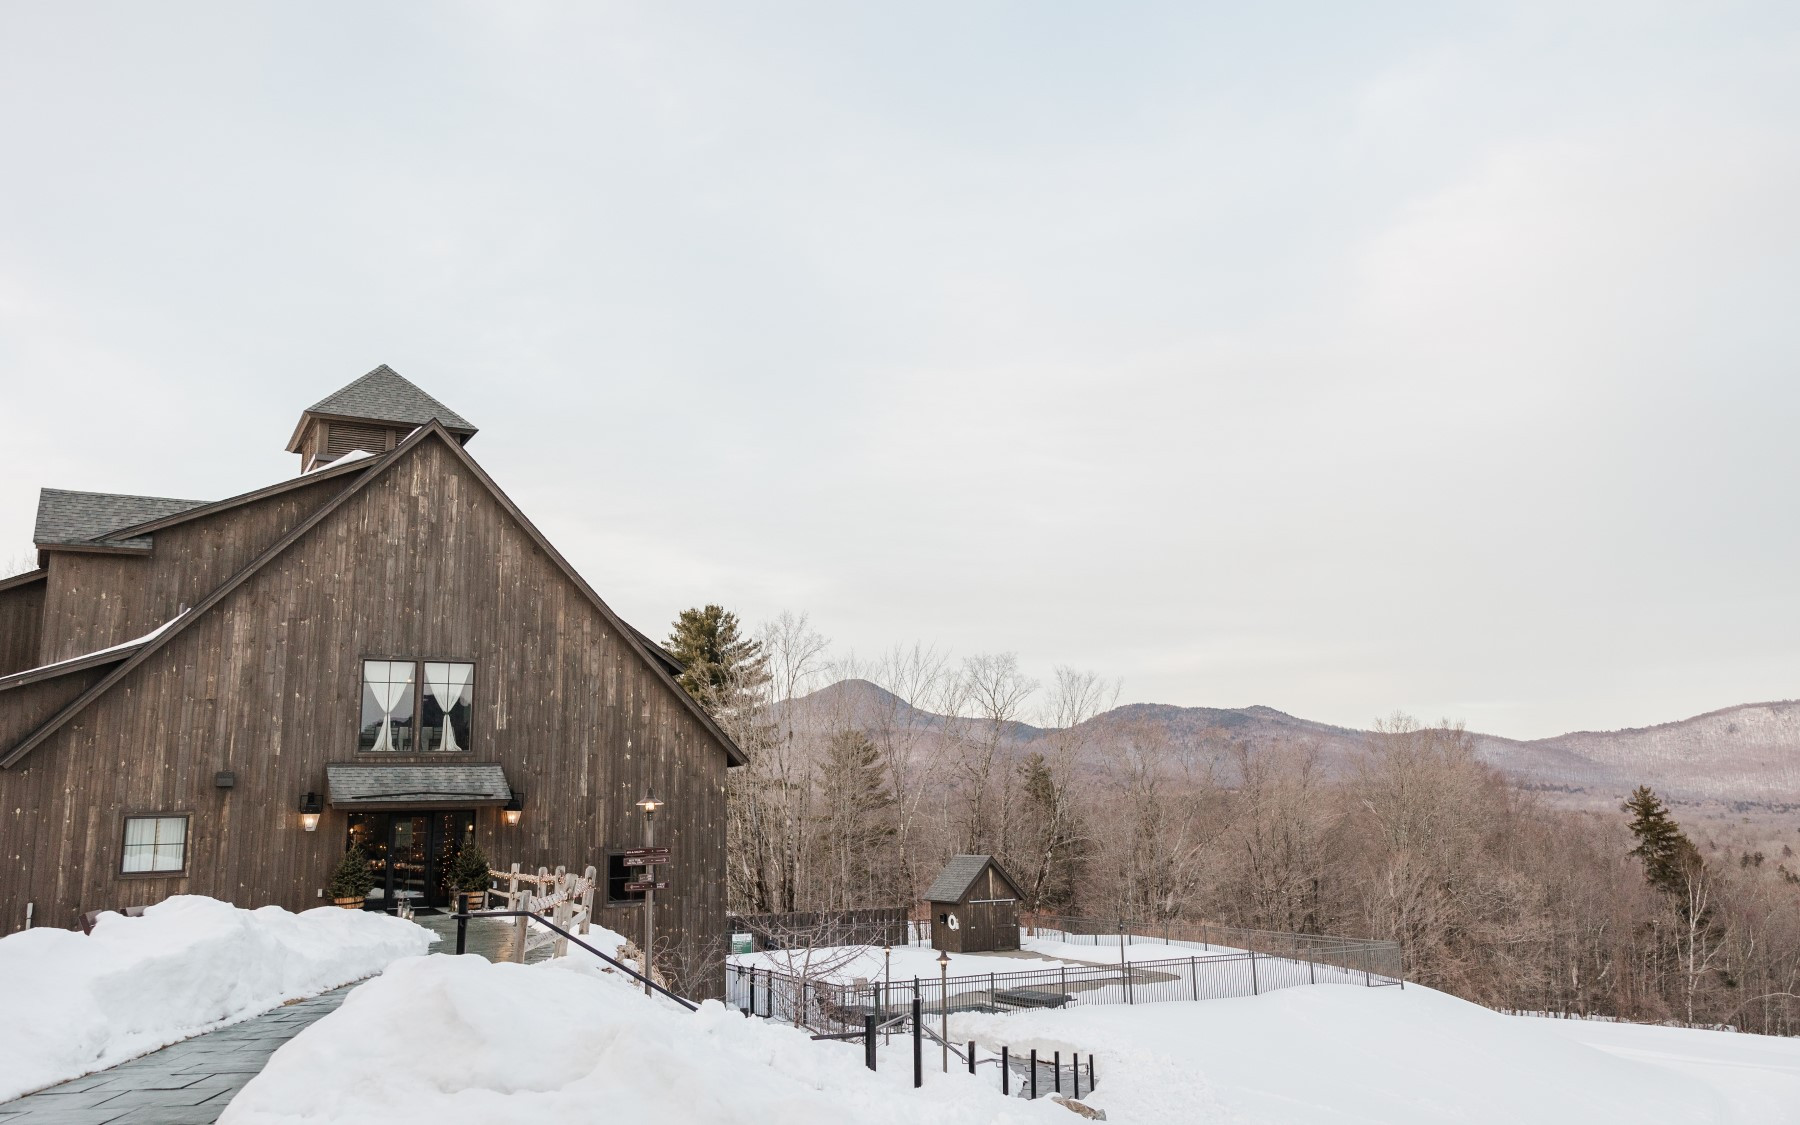 Event barn in the winter featuring a covered pool to the left, overlooking a mountain scene